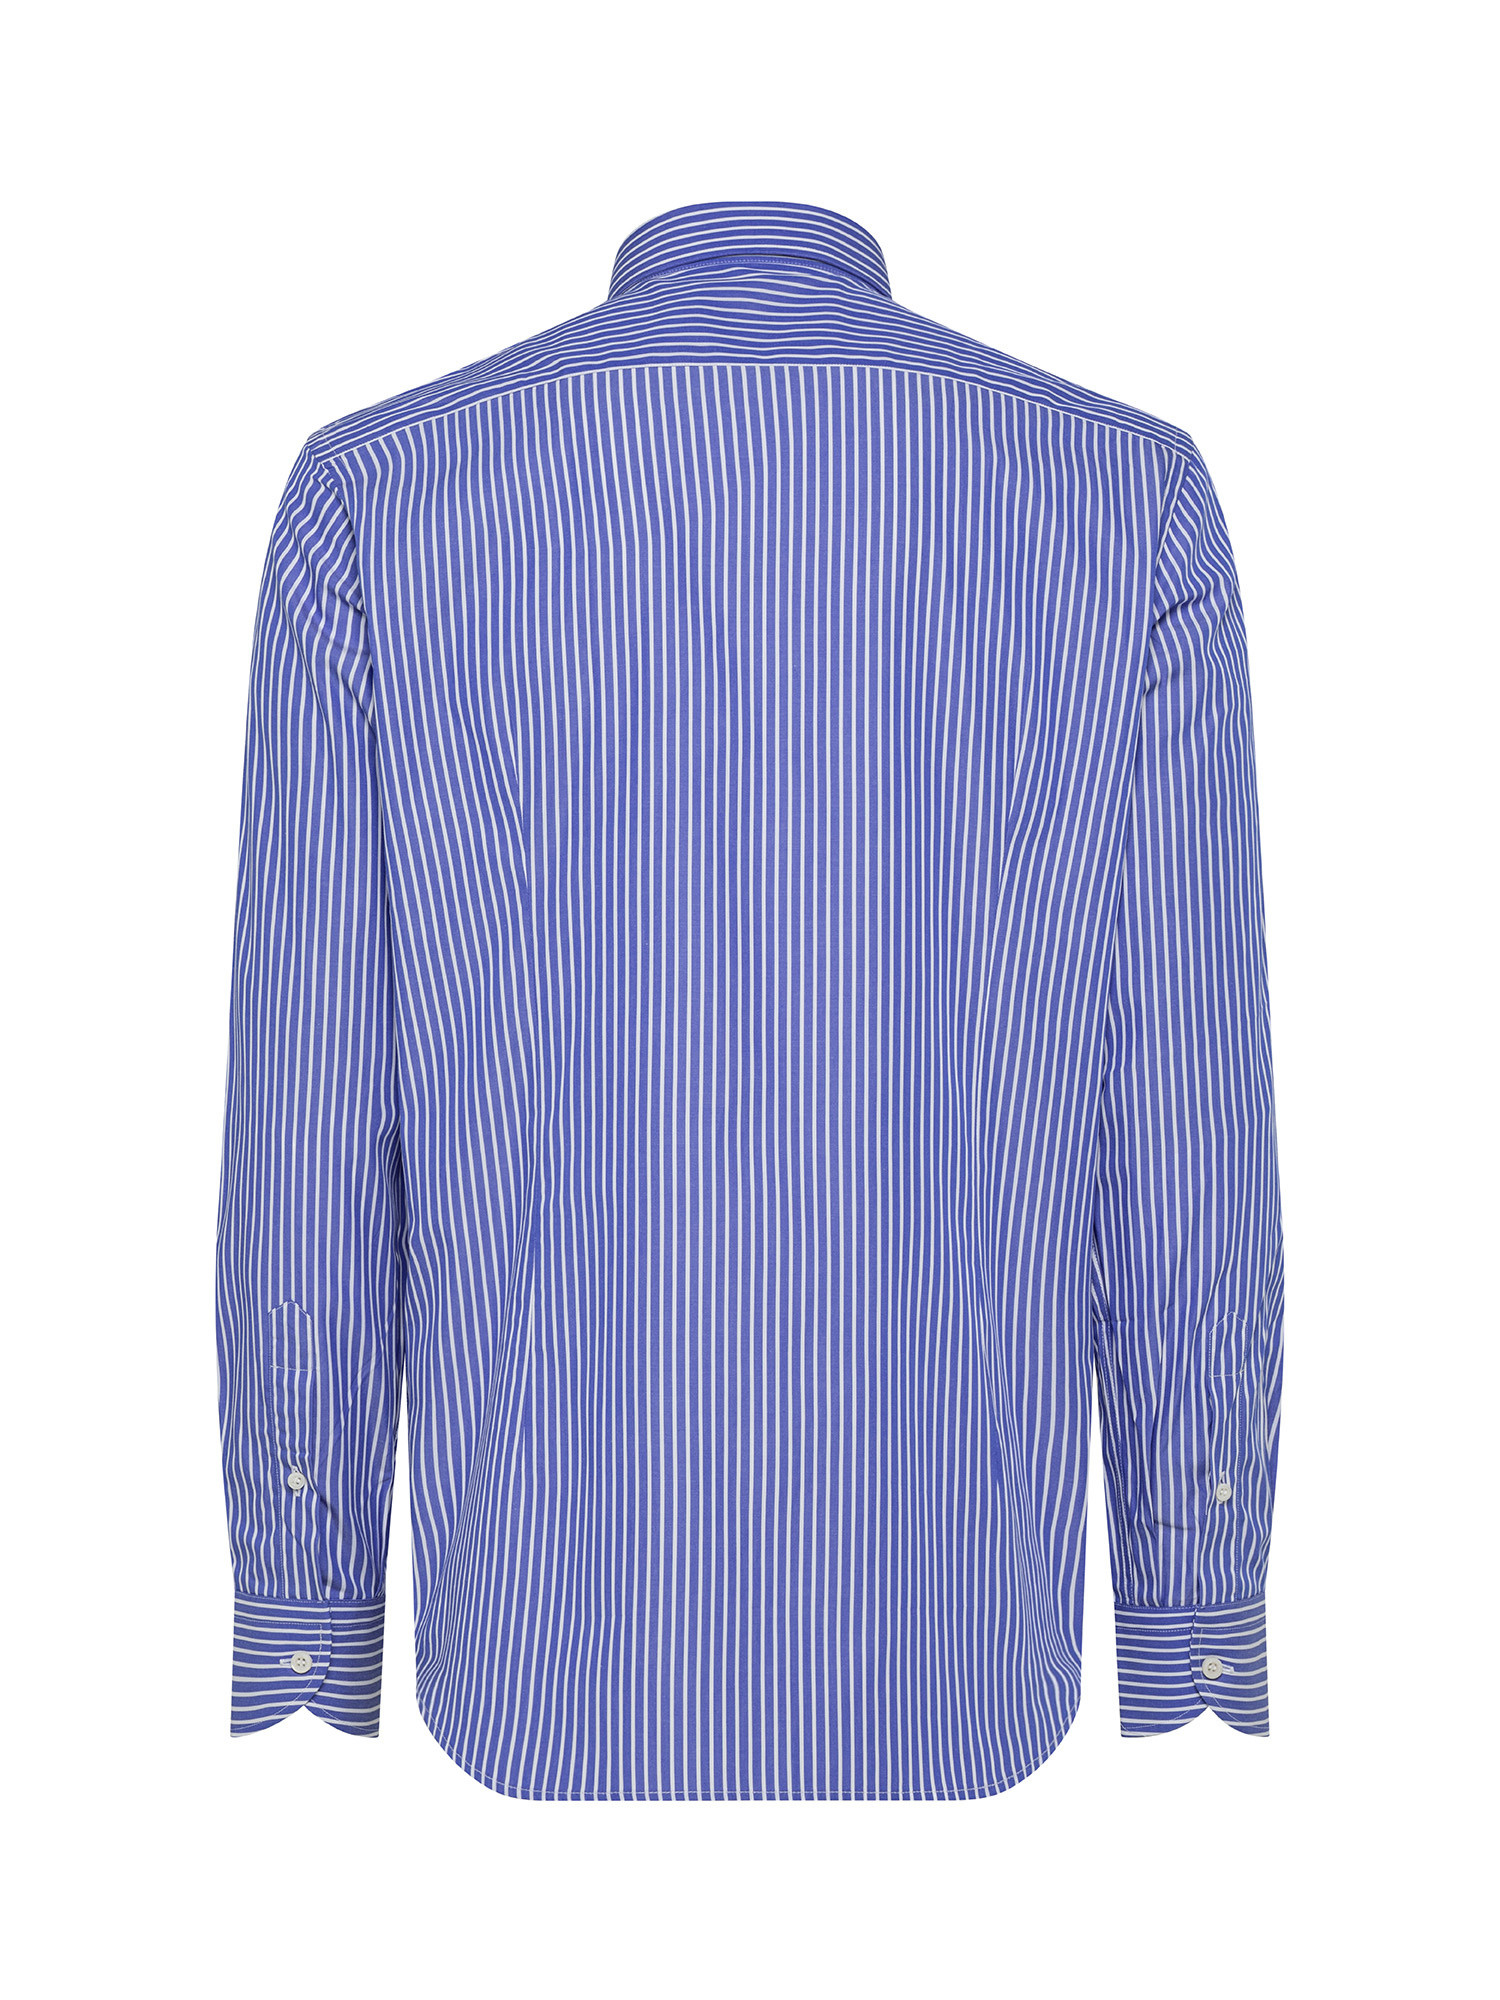 Slim fit shirt in pure cotton, Blue, large image number 2